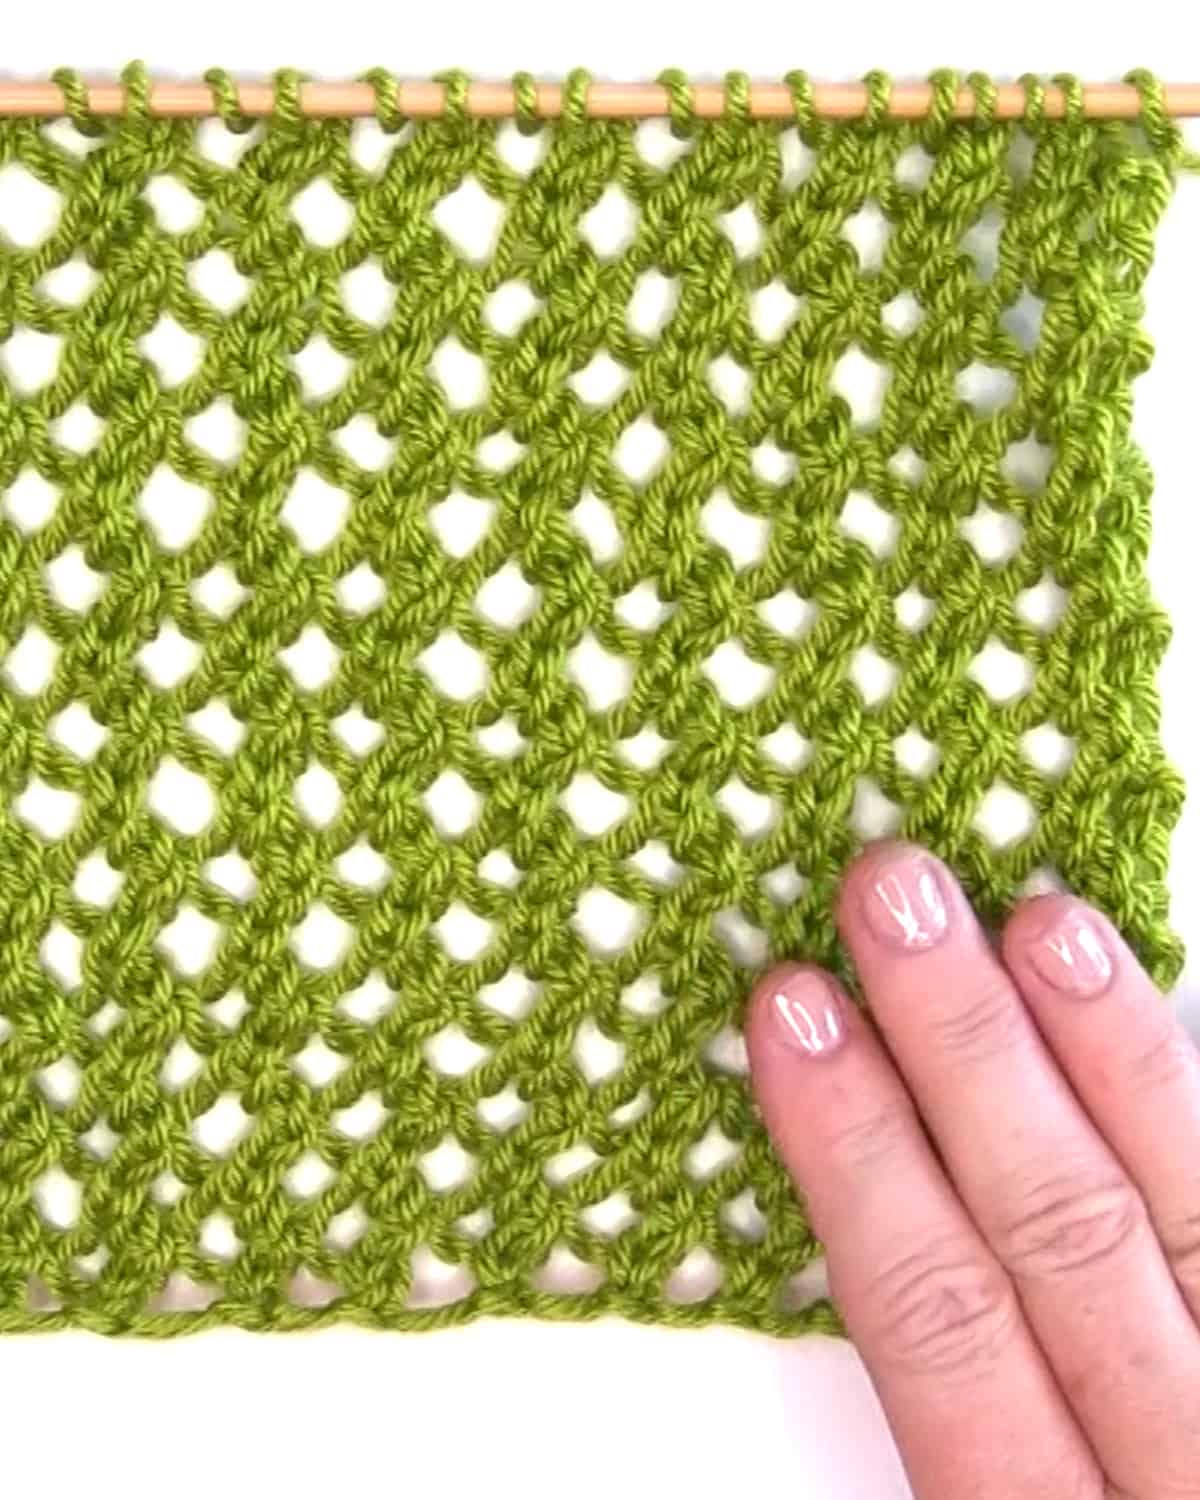 Lace knitted mesh swatch in green yarn color with hand on needle.